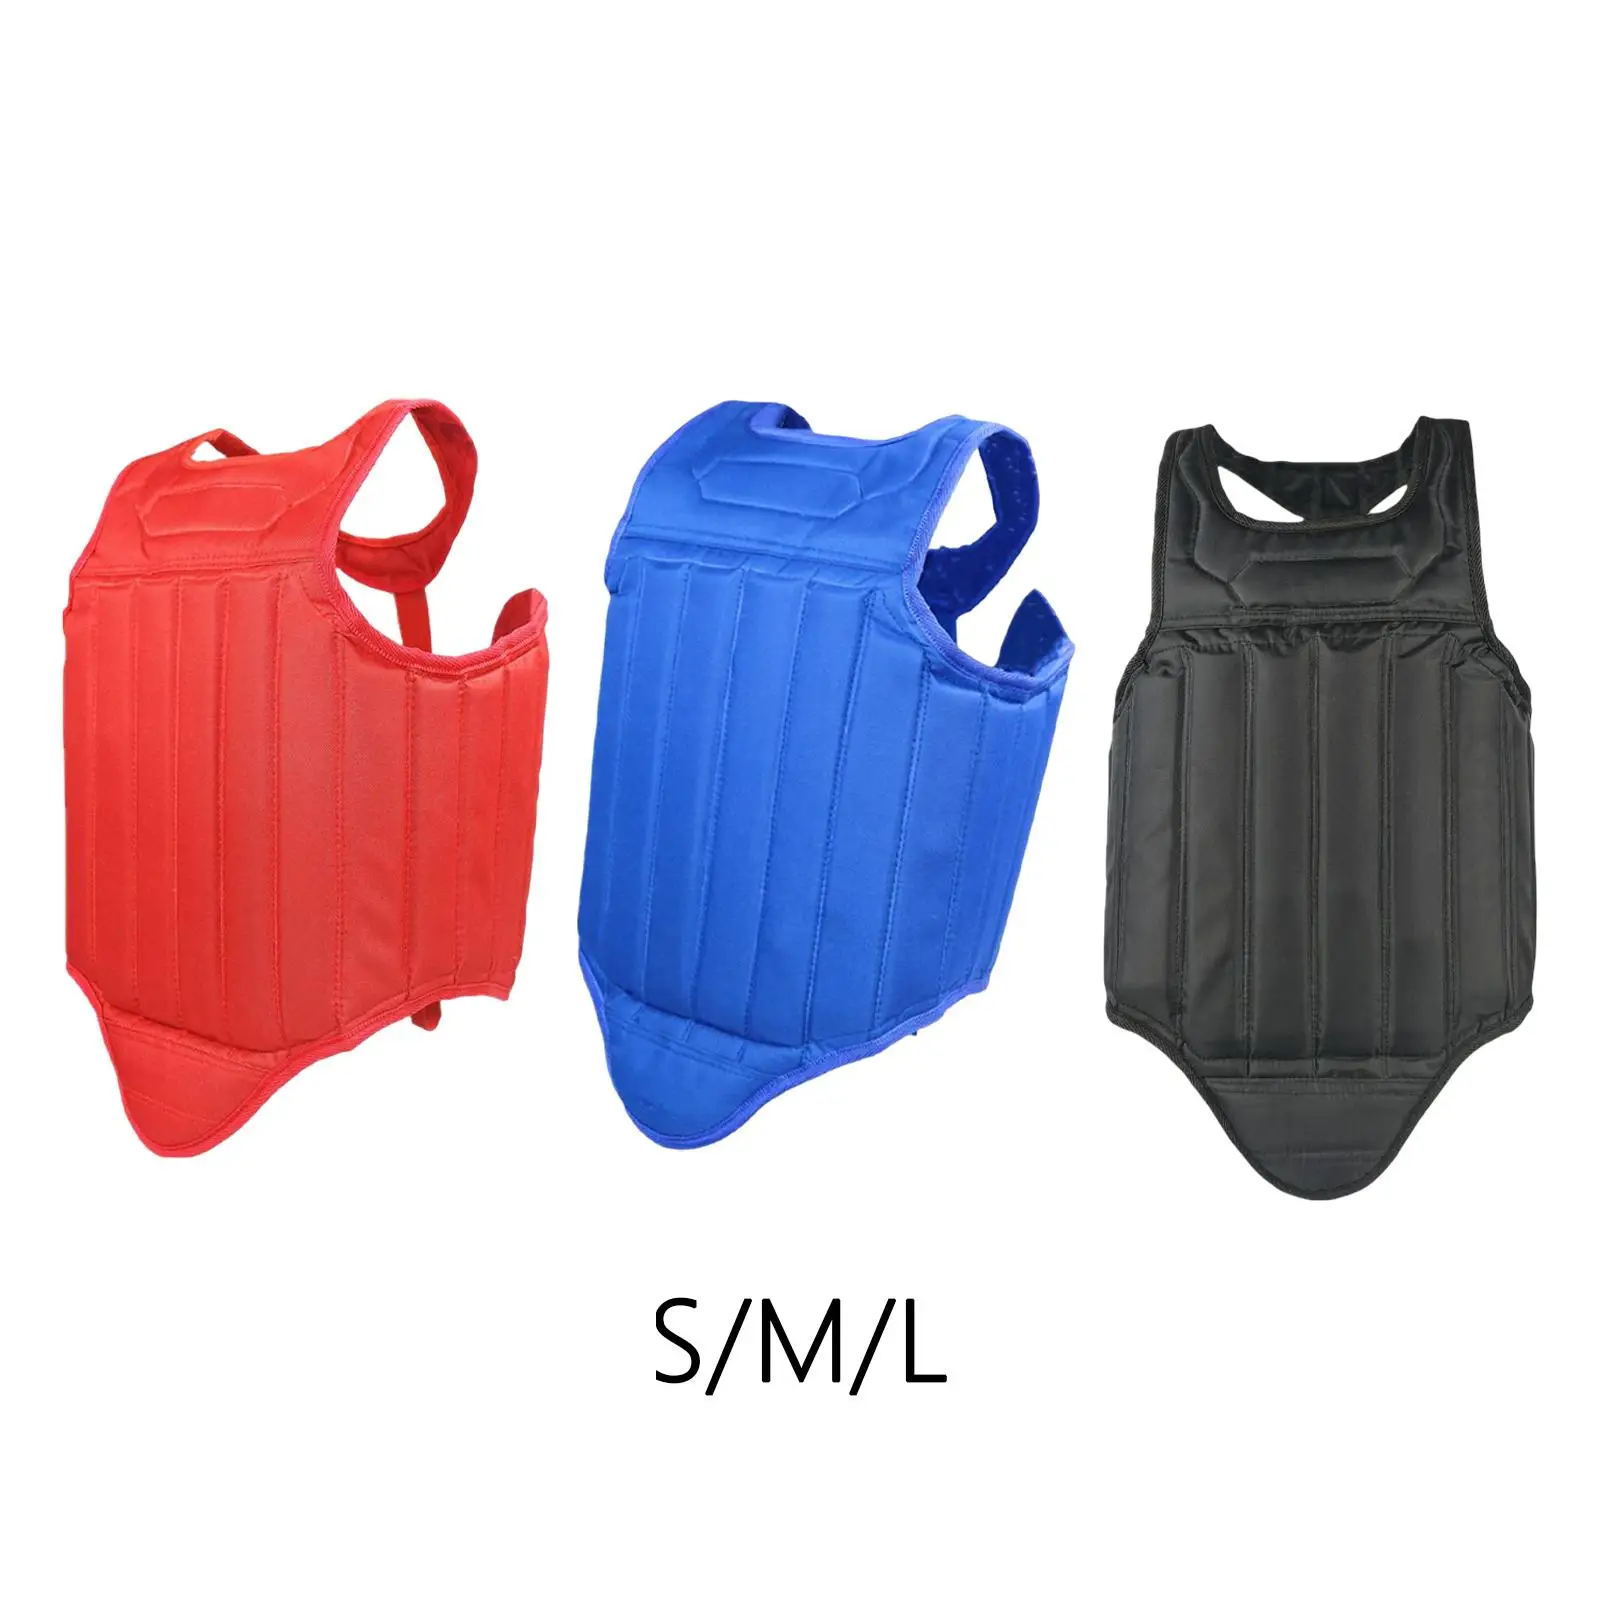 

Unisex Karate Chest Guard Taekwondo Protector Vest Rib Shield Mma Body Protector for Martial Arts Sparring Training Accessories